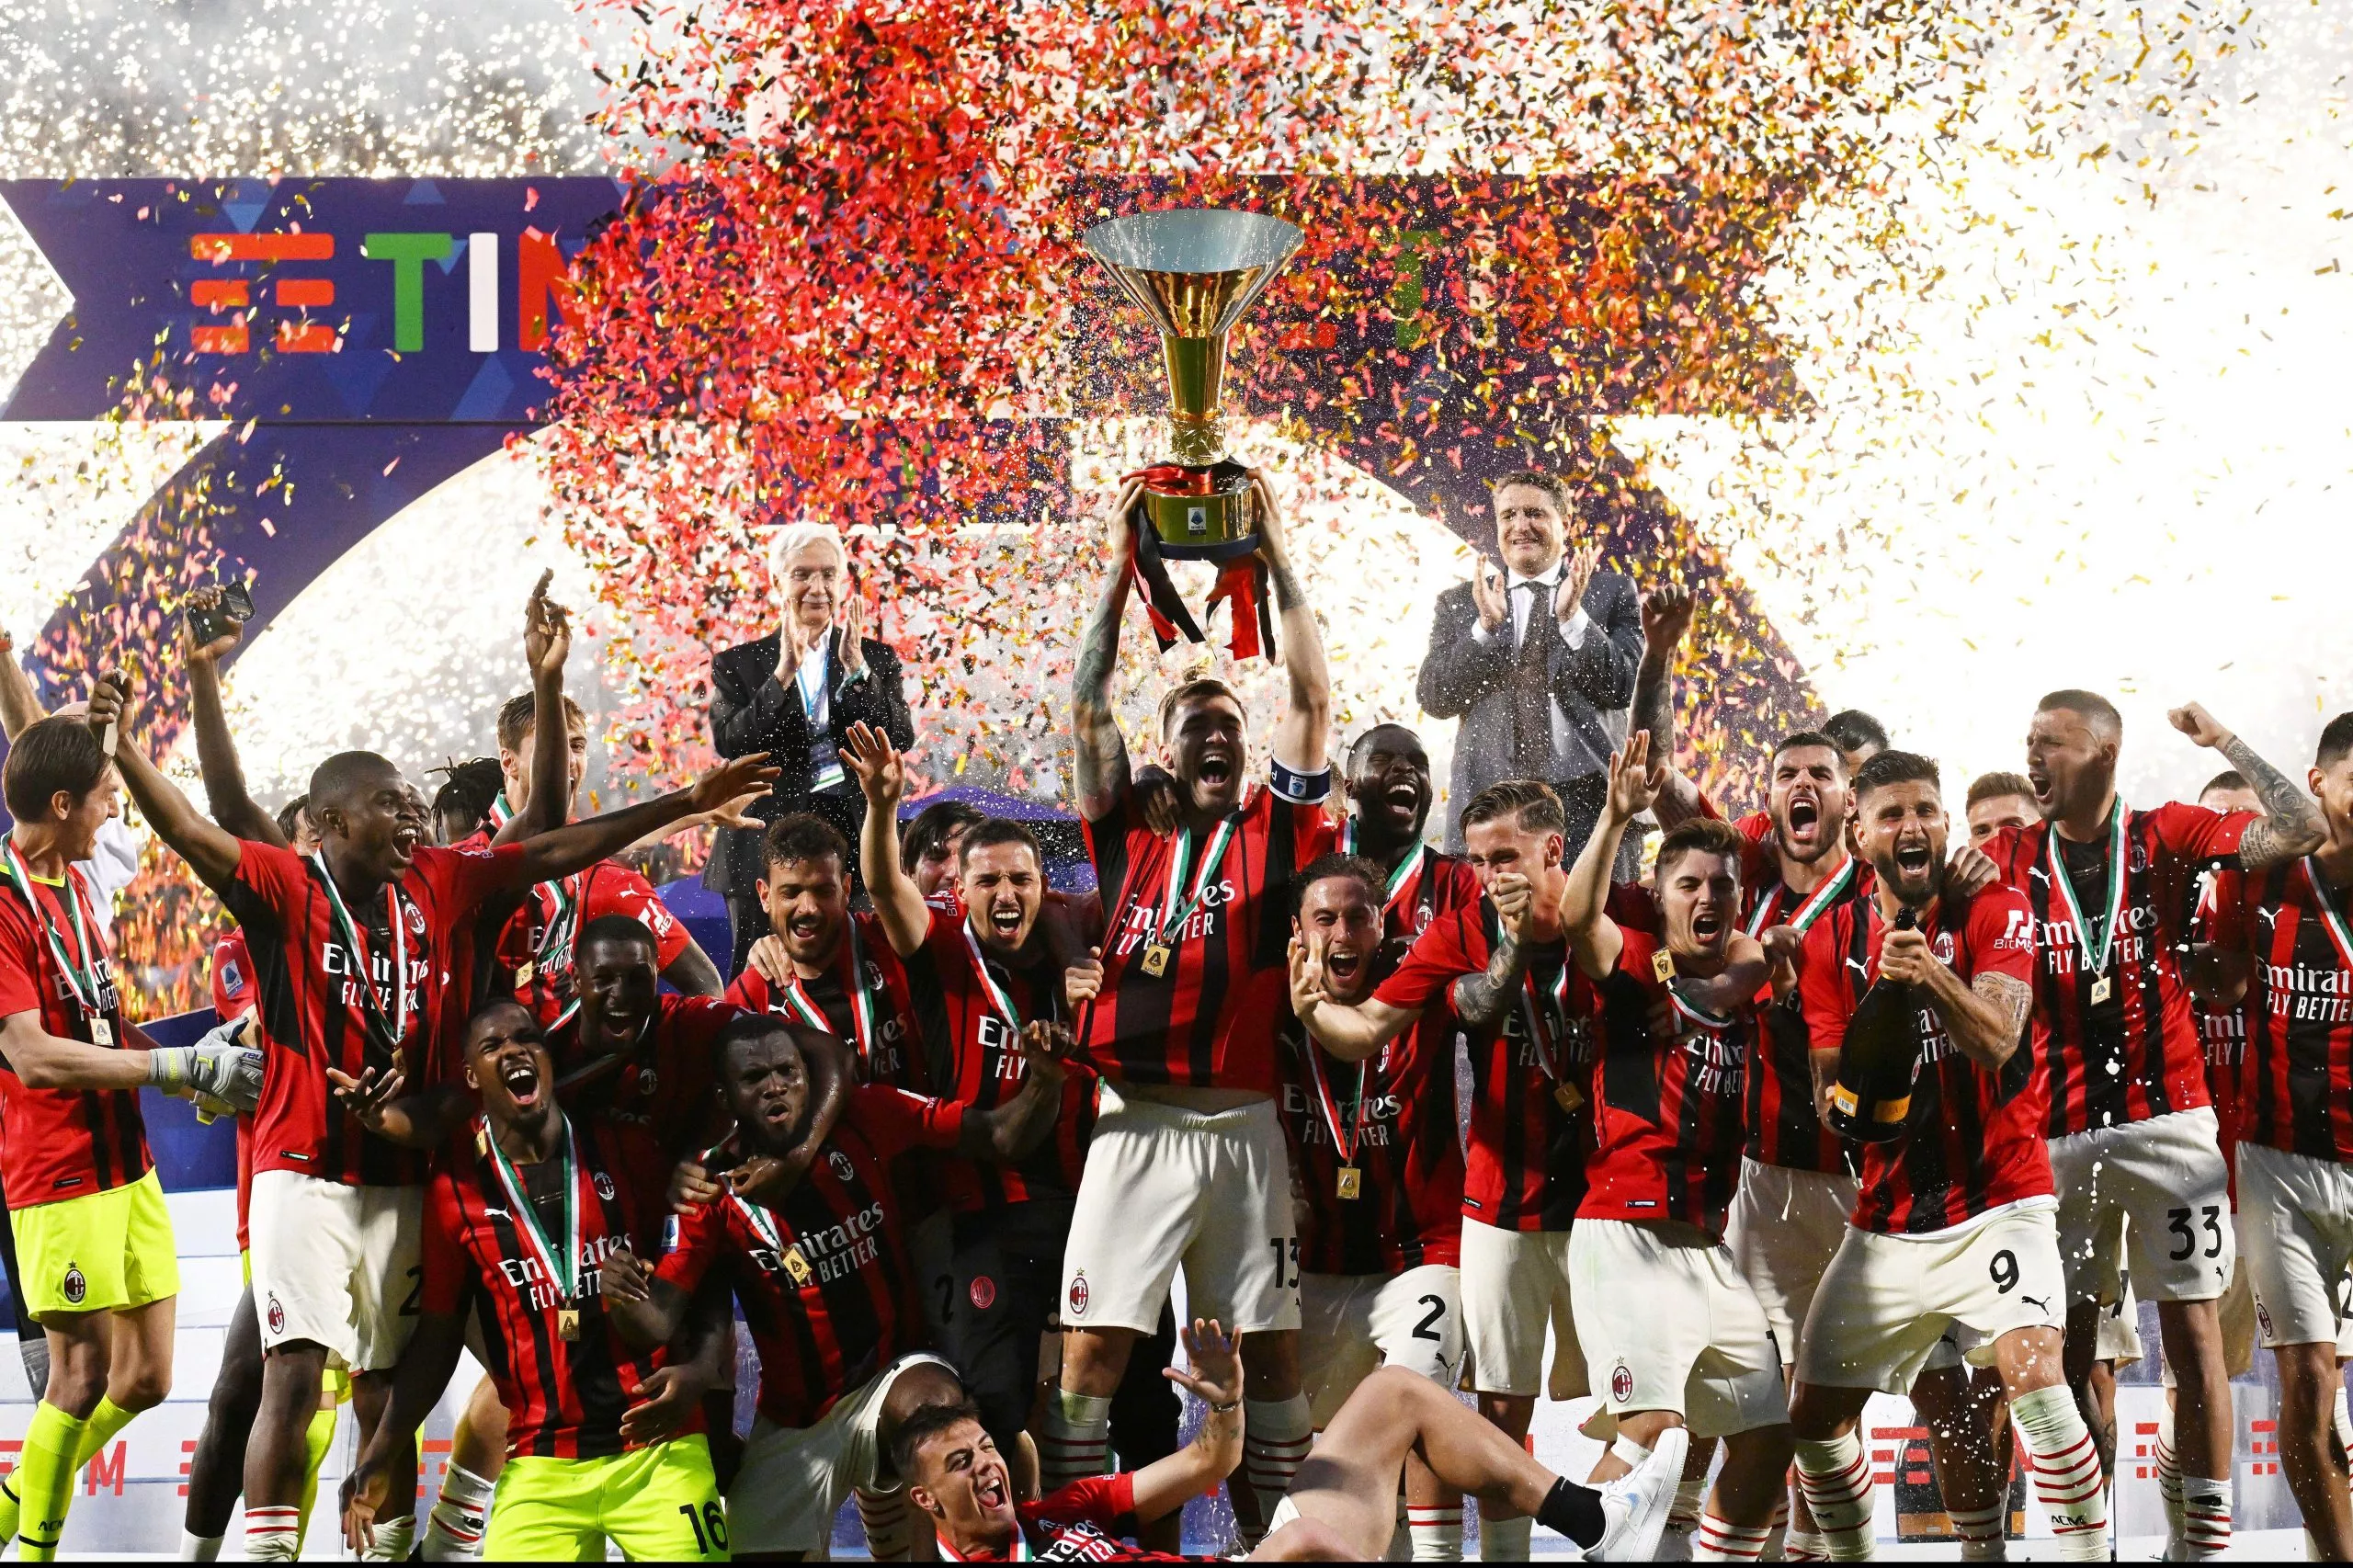 Reggio Emilia, Italy. 22nd May, 2022. Milan players celebrate with the trophy at the end of the Serie A football match between US Sassuolo and AC Milan at Citta del Tricolore stadium in Reggio Emilia (Italy), May 22th 2022. Photo Insidefoto Credit: inside